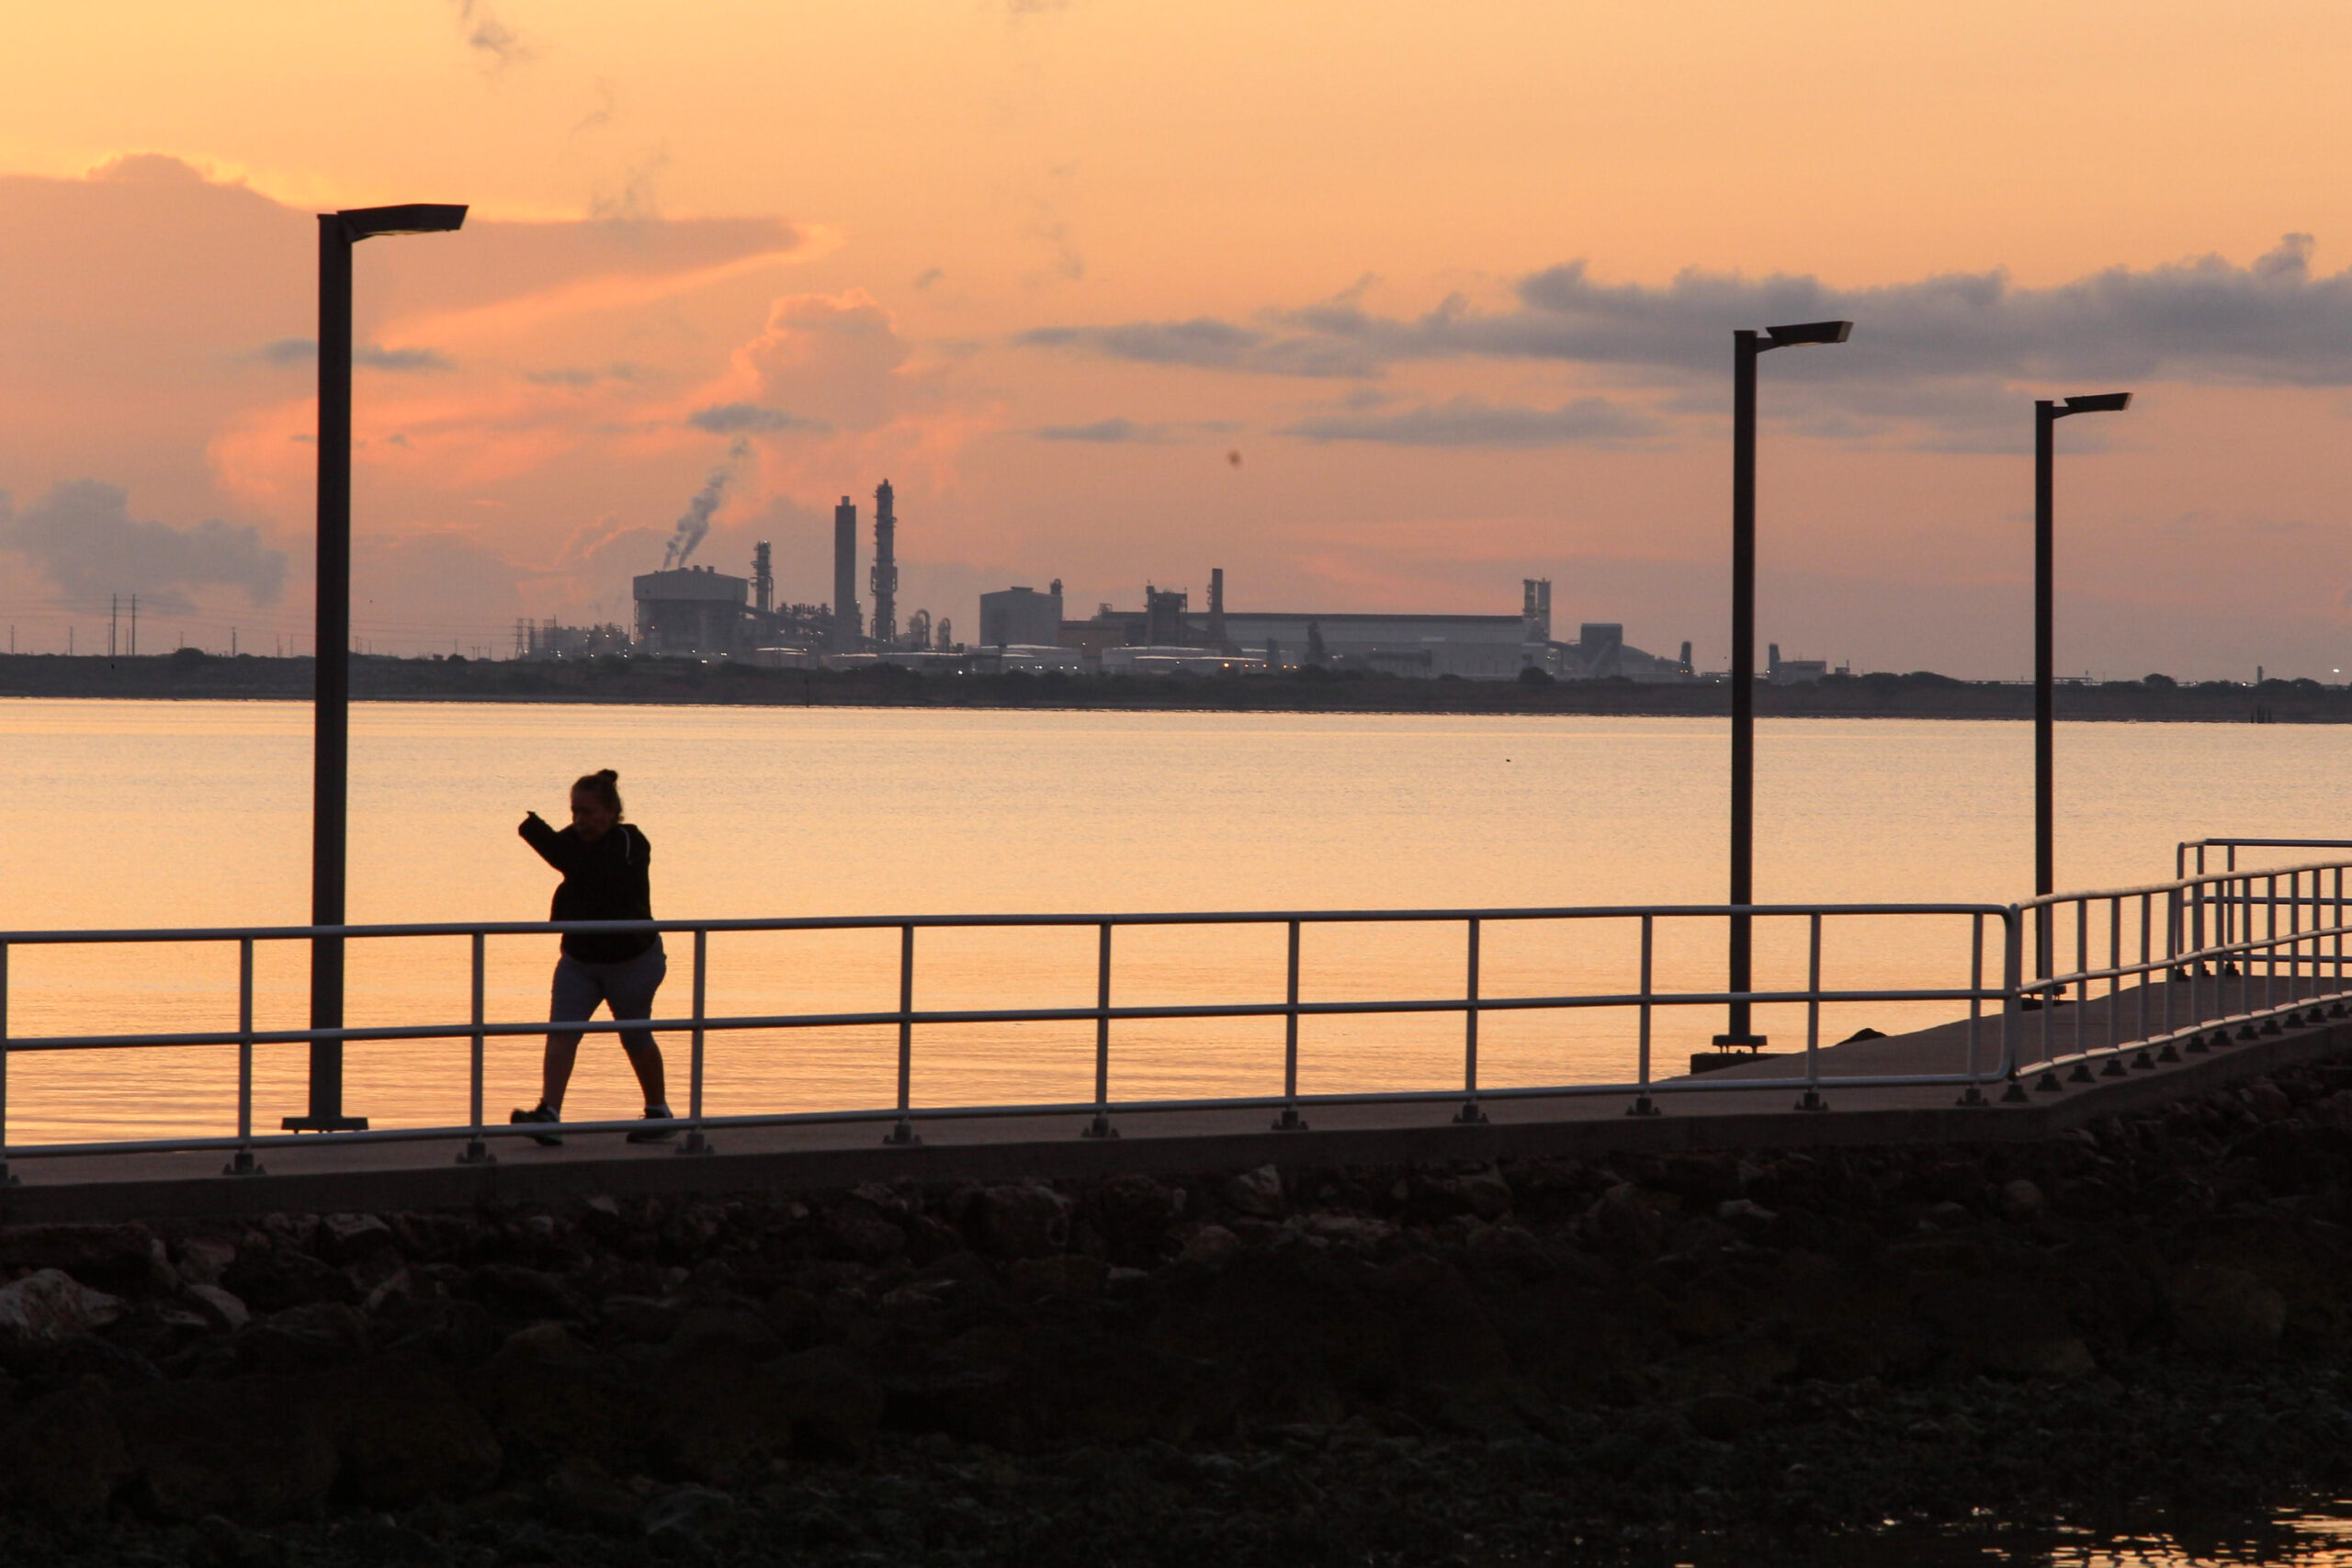 A person walks along a fenced in pier along the water, at sunset, with a steaming refinery/oil terminal across the Gulf.